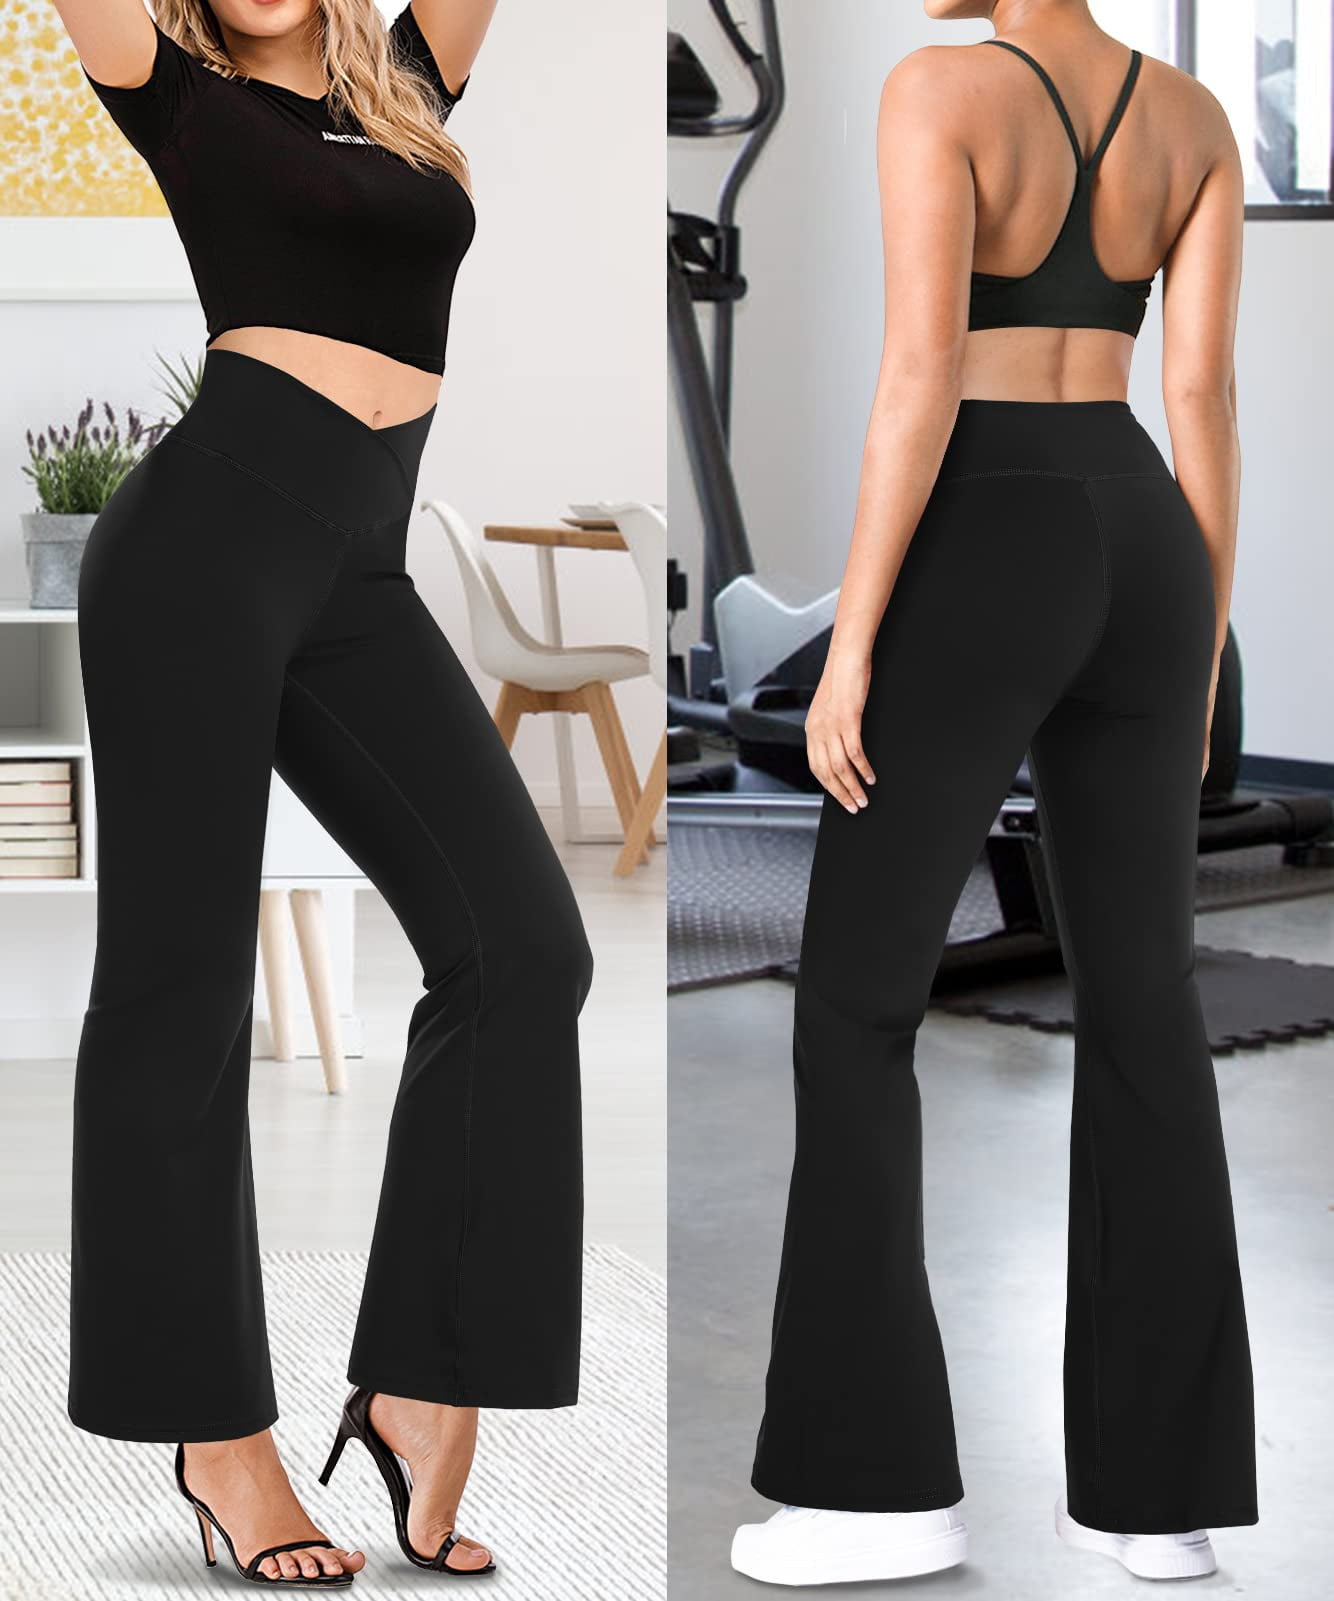 Ilfioreemio High Waisted Crossover Flare Leggings Cross Waist Bootcut Yoga  Pants Wide Legs Workout Work Party Leggings for Women 